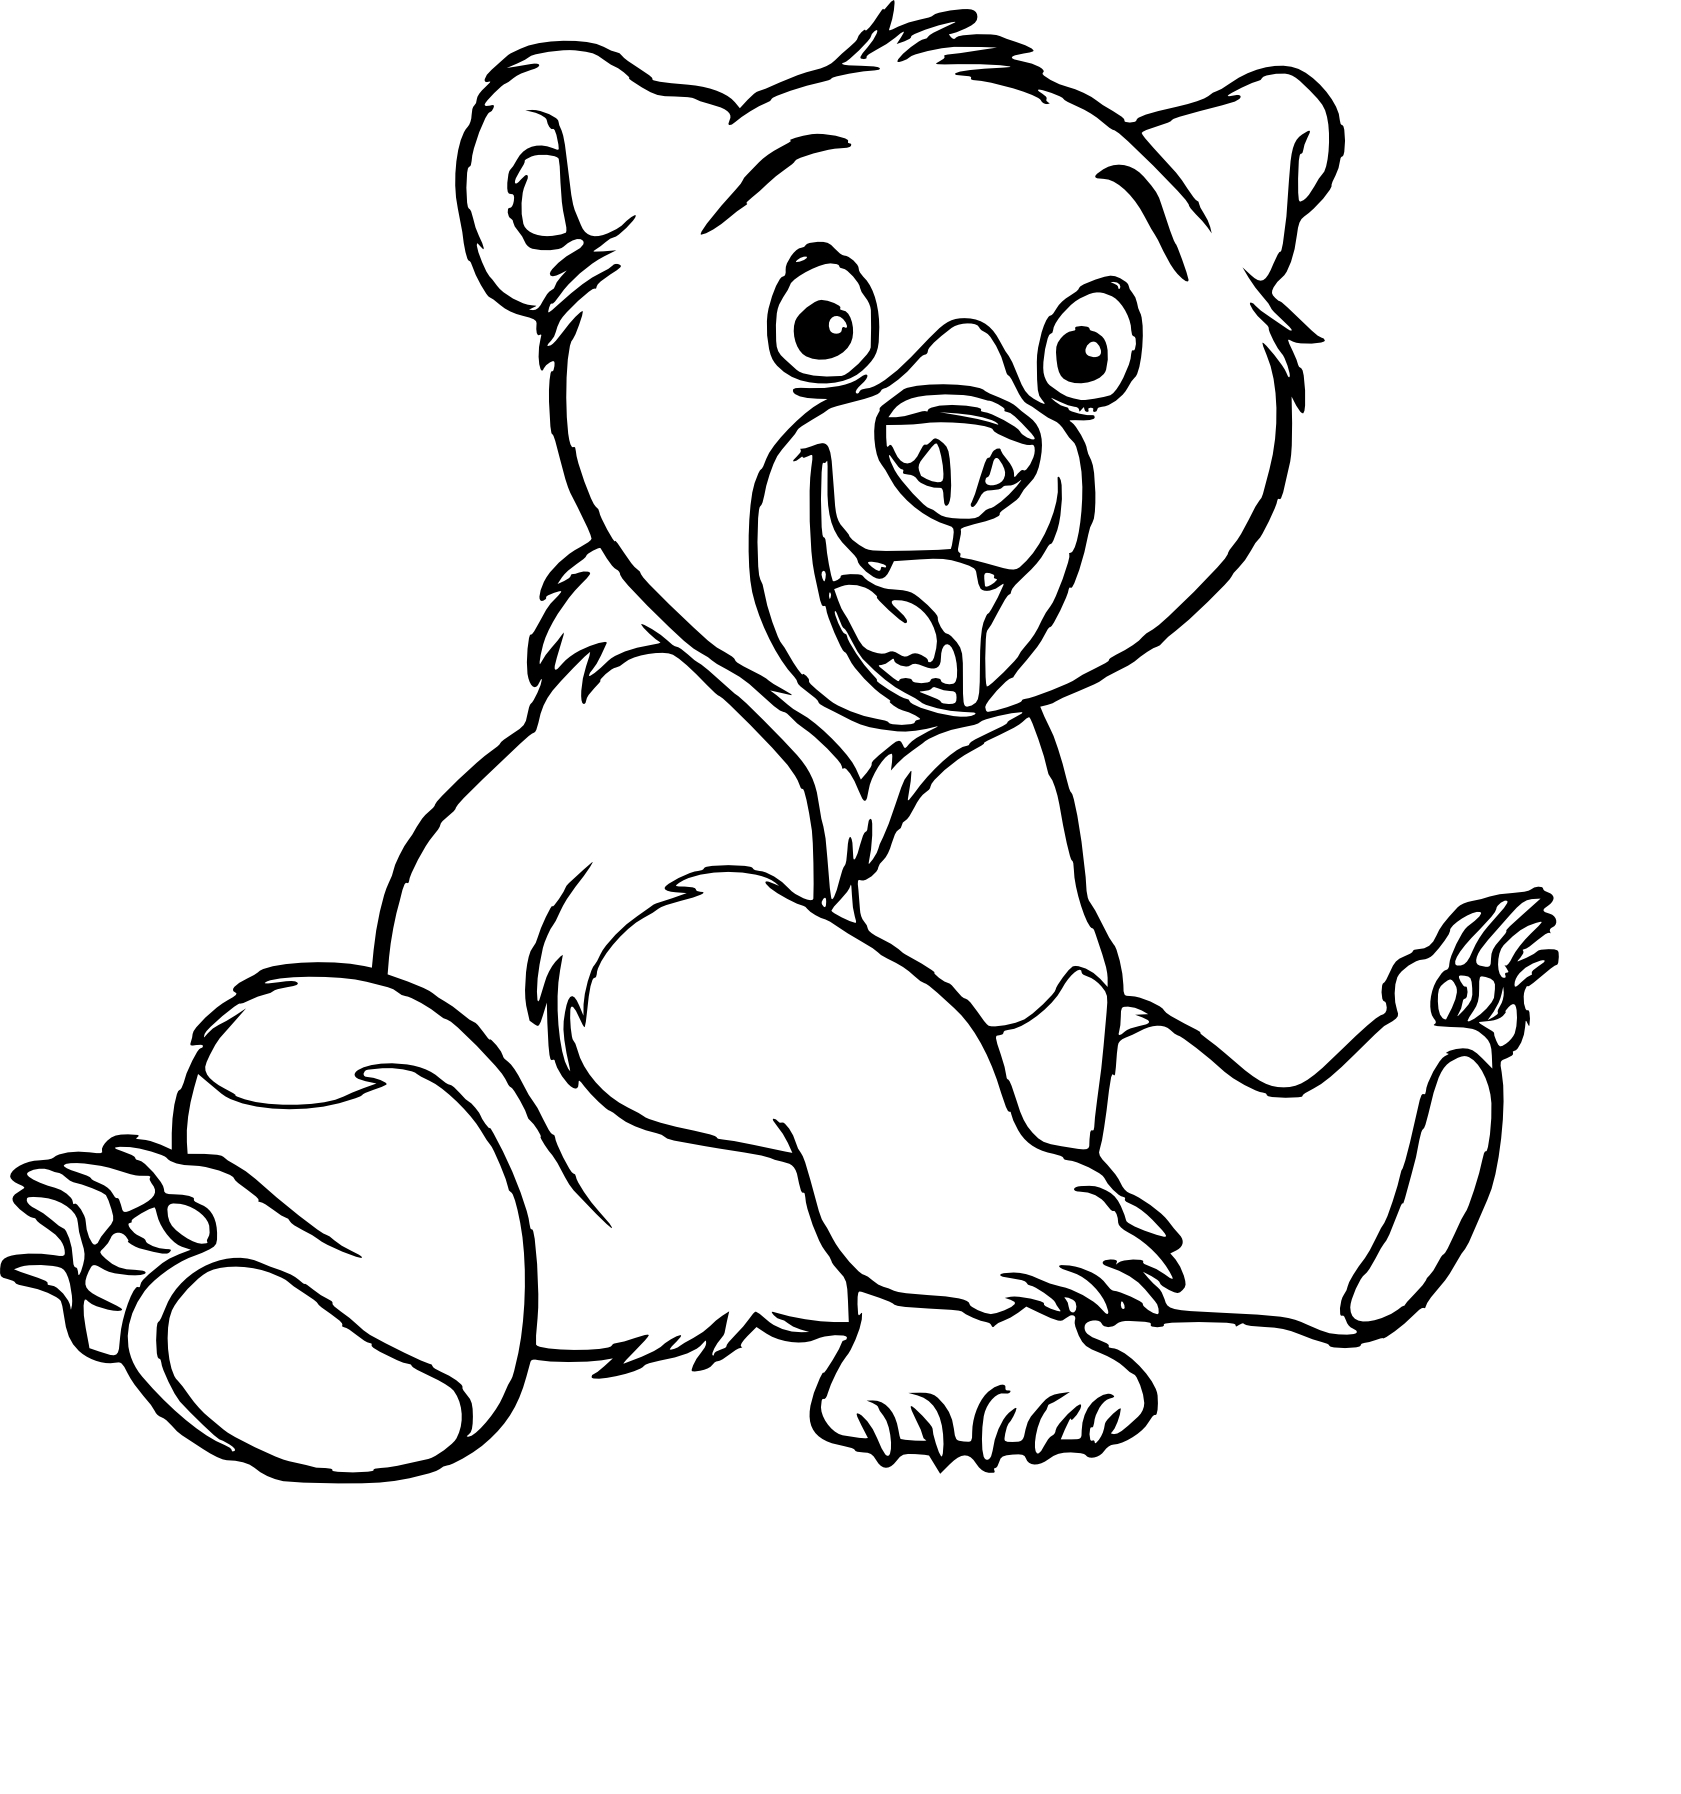 Koda Brother Of The Bears coloring page